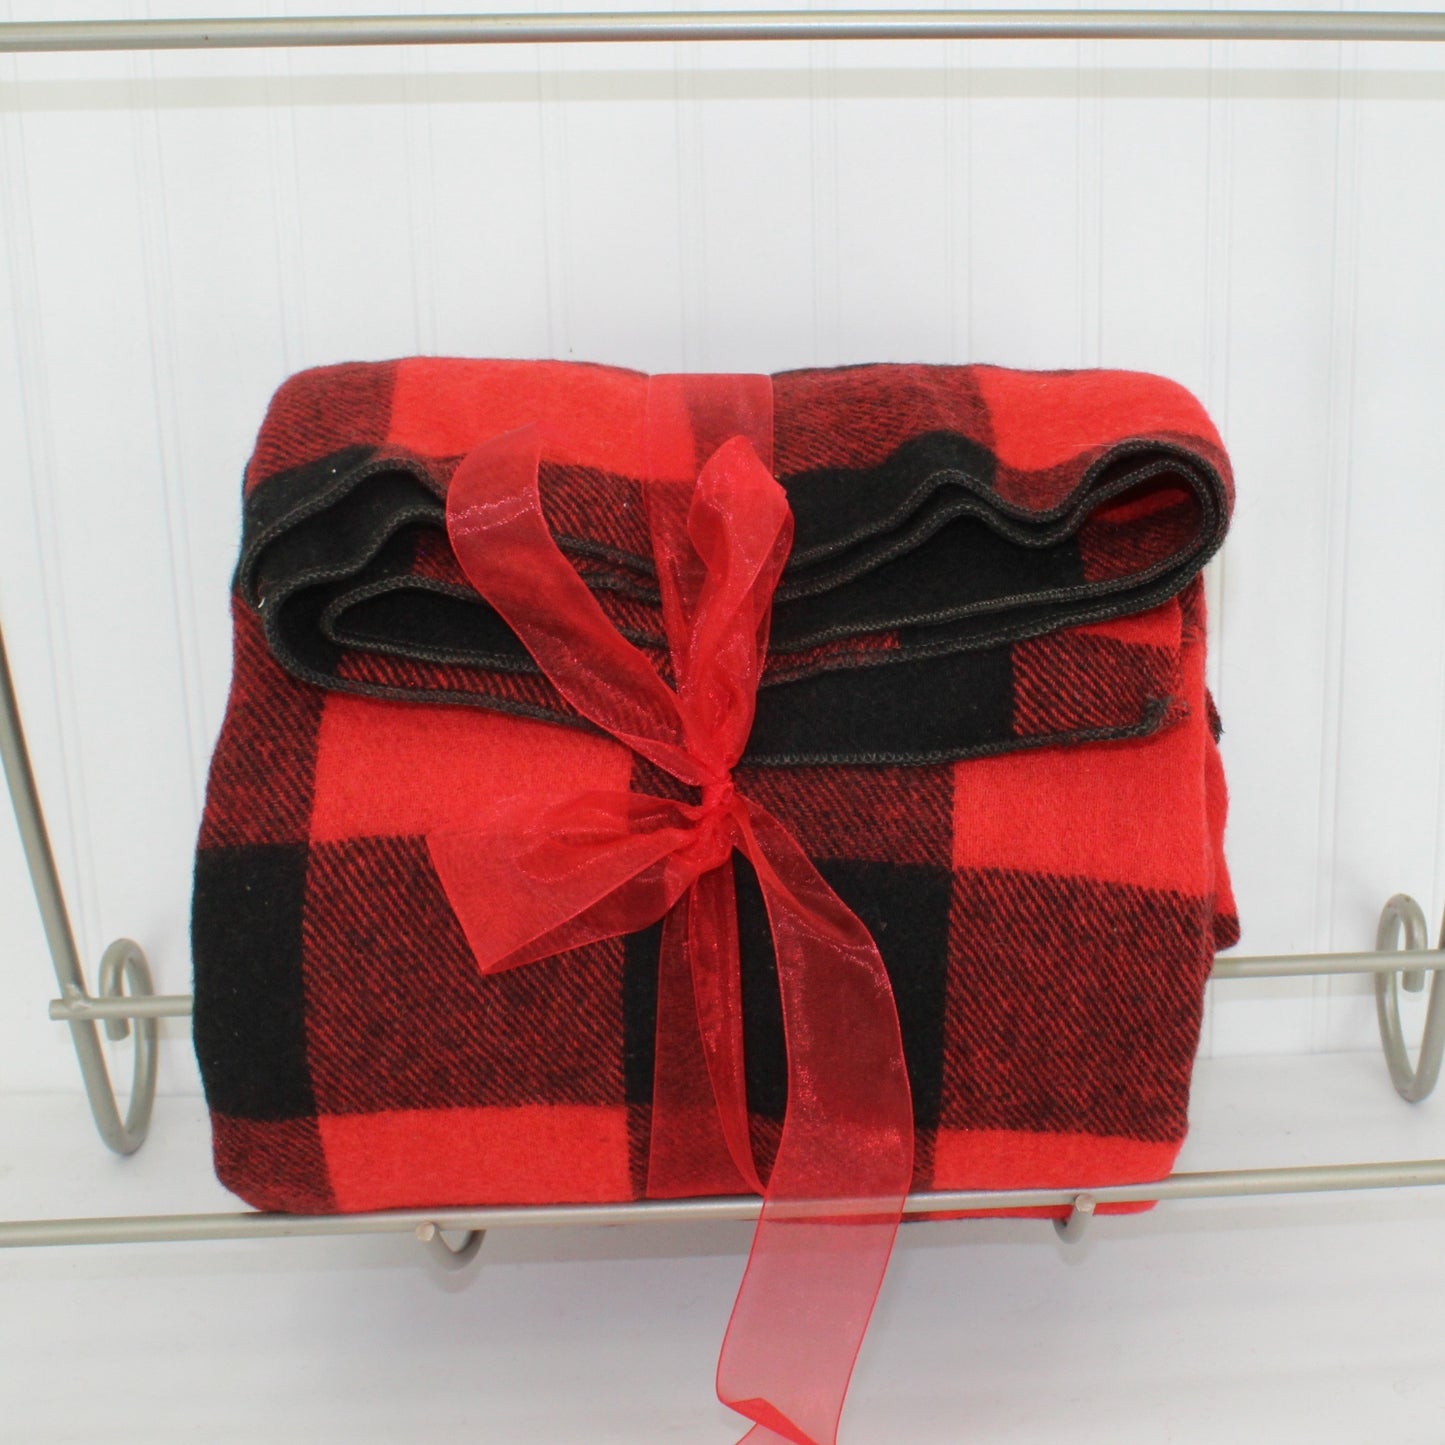 Double Length Wool Blanket Cabin Camp Red Black Check 67" X 154"